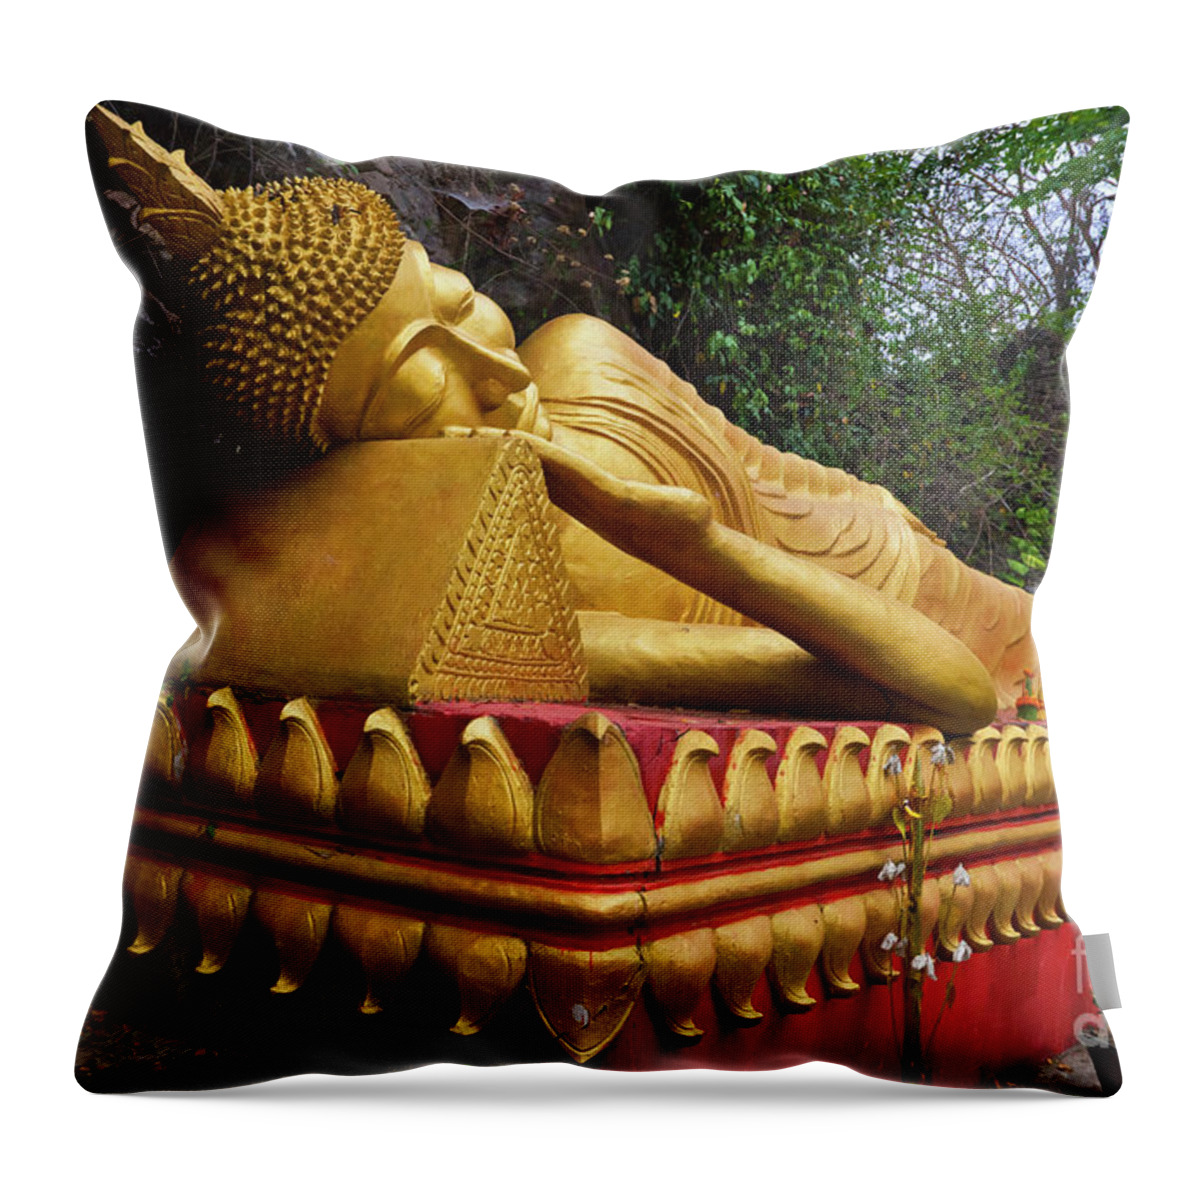 Laos Throw Pillow featuring the photograph Laos_d602 by Craig Lovell